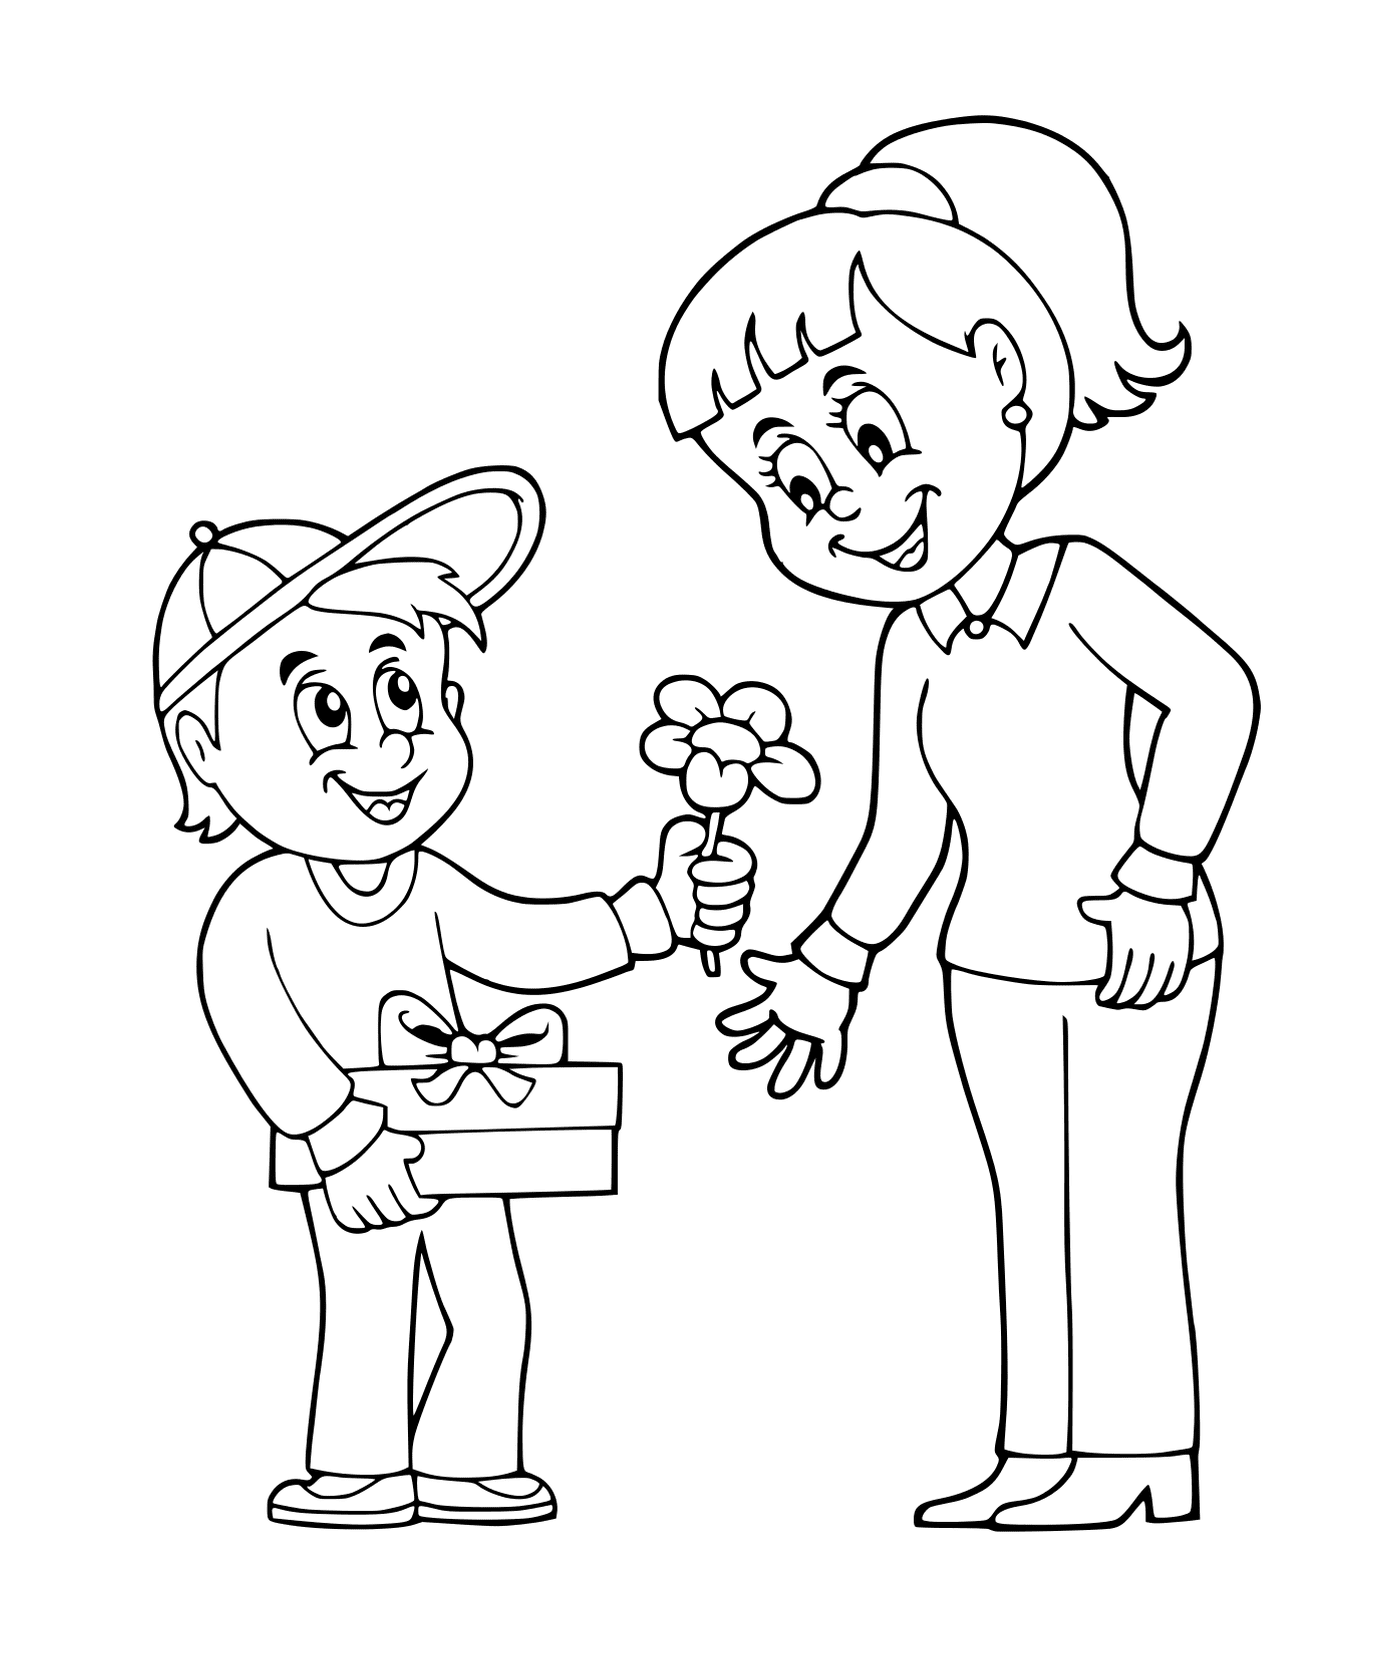  A boy offering flowers to a girl 